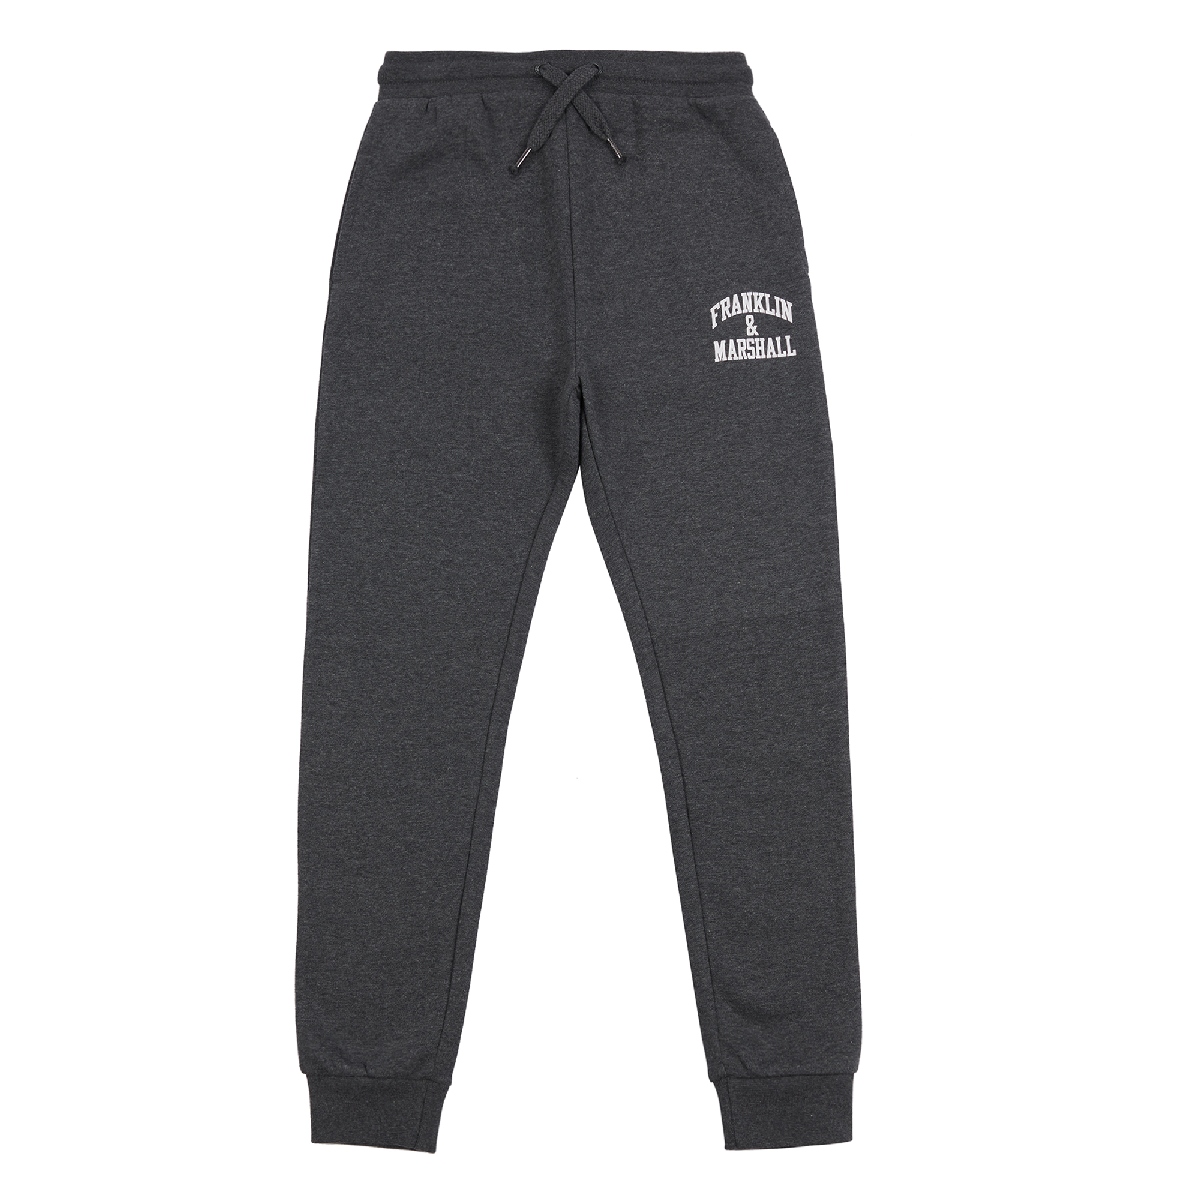 Buy Franklin & Marshall Vintage Arch Logo Joggers online | Mothercare Qatar